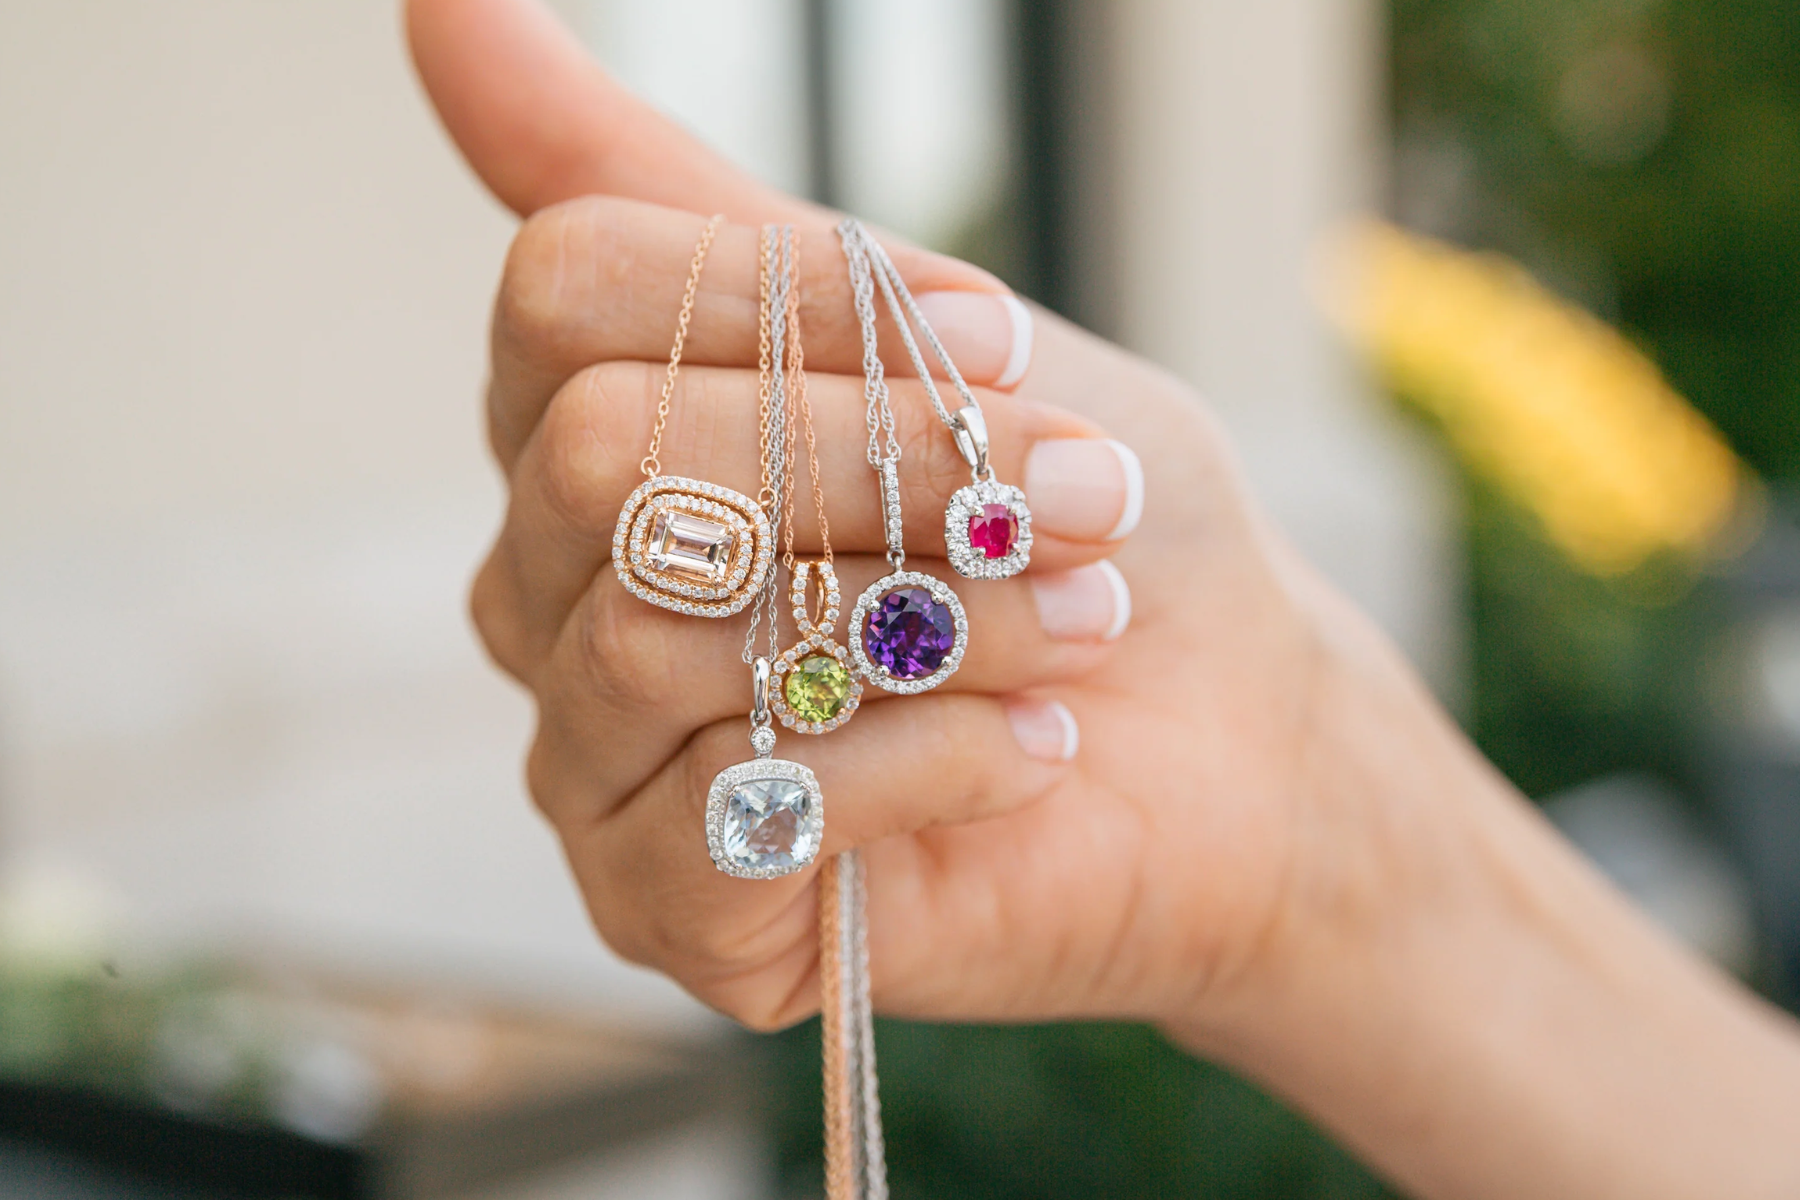 A woman's hand clutching various birthstone necklaces